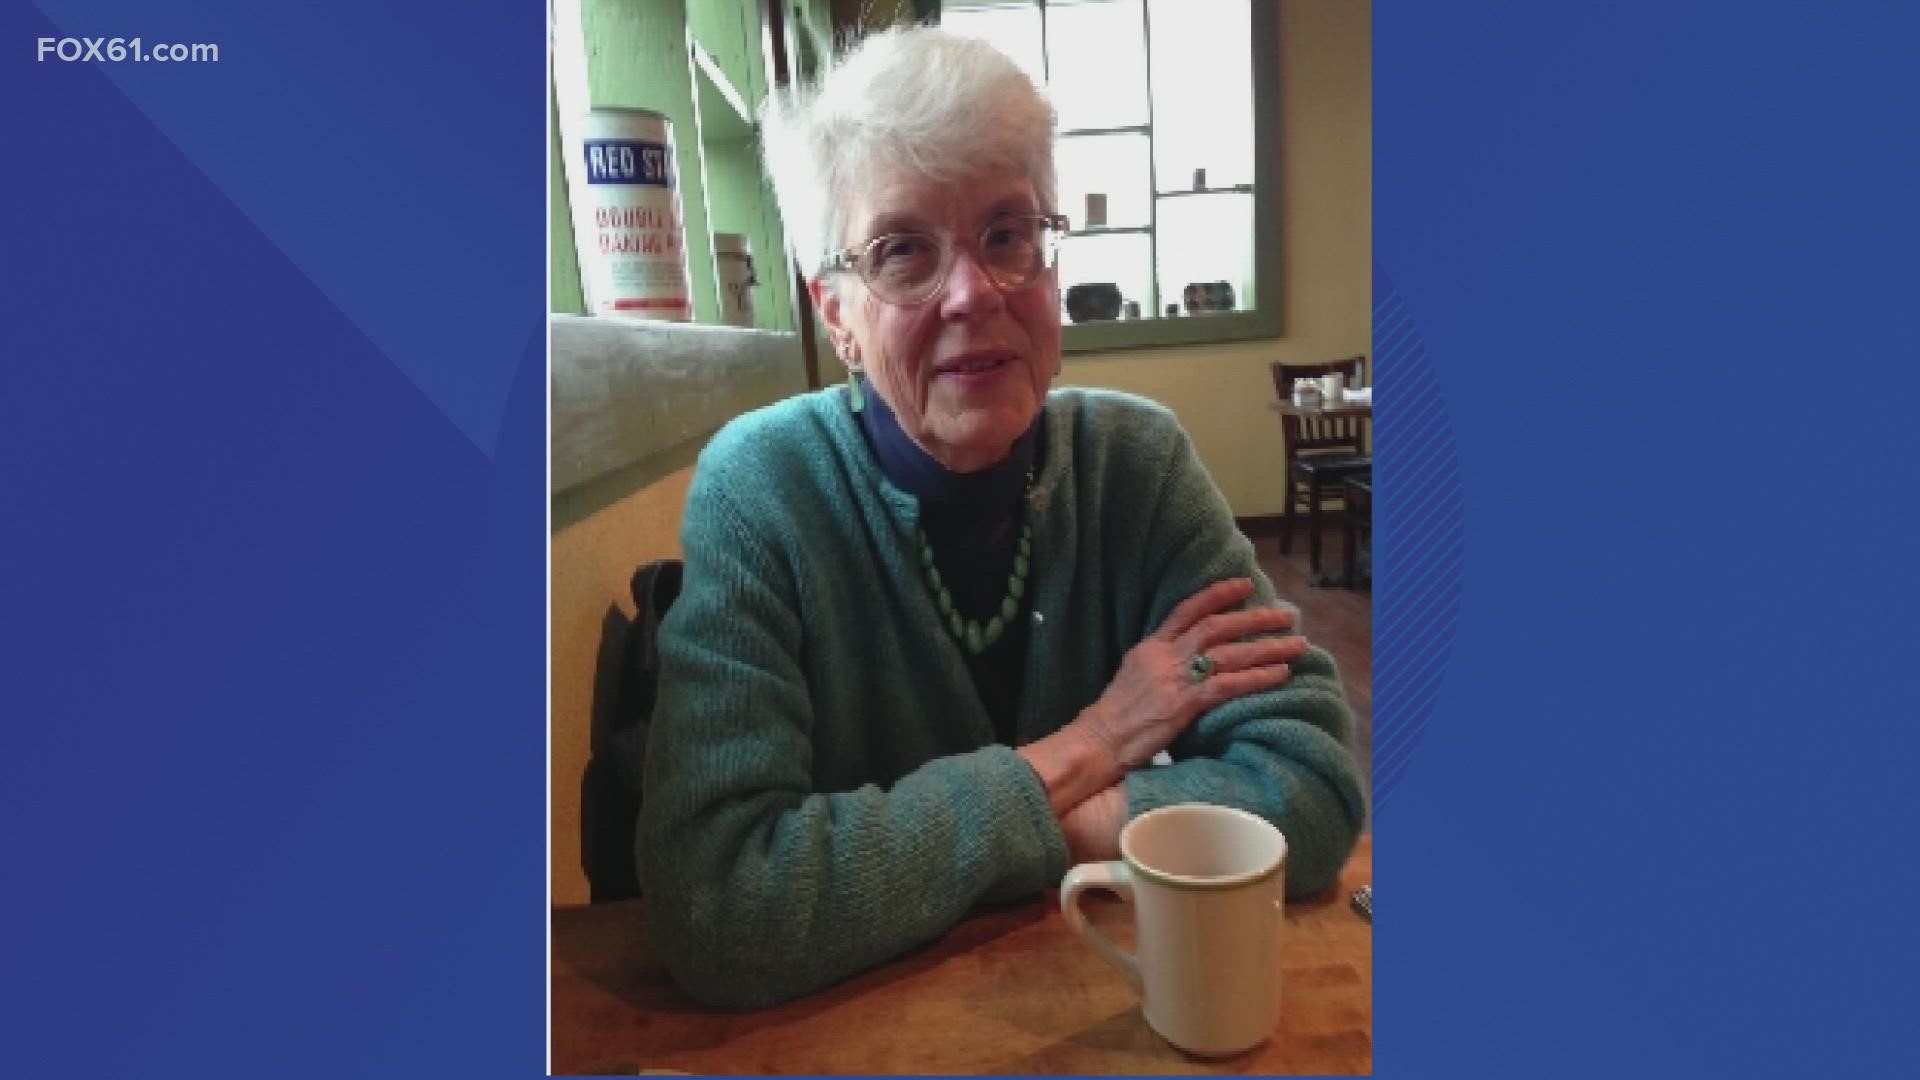 The woman was missing for several days before she was found in wethersfield.